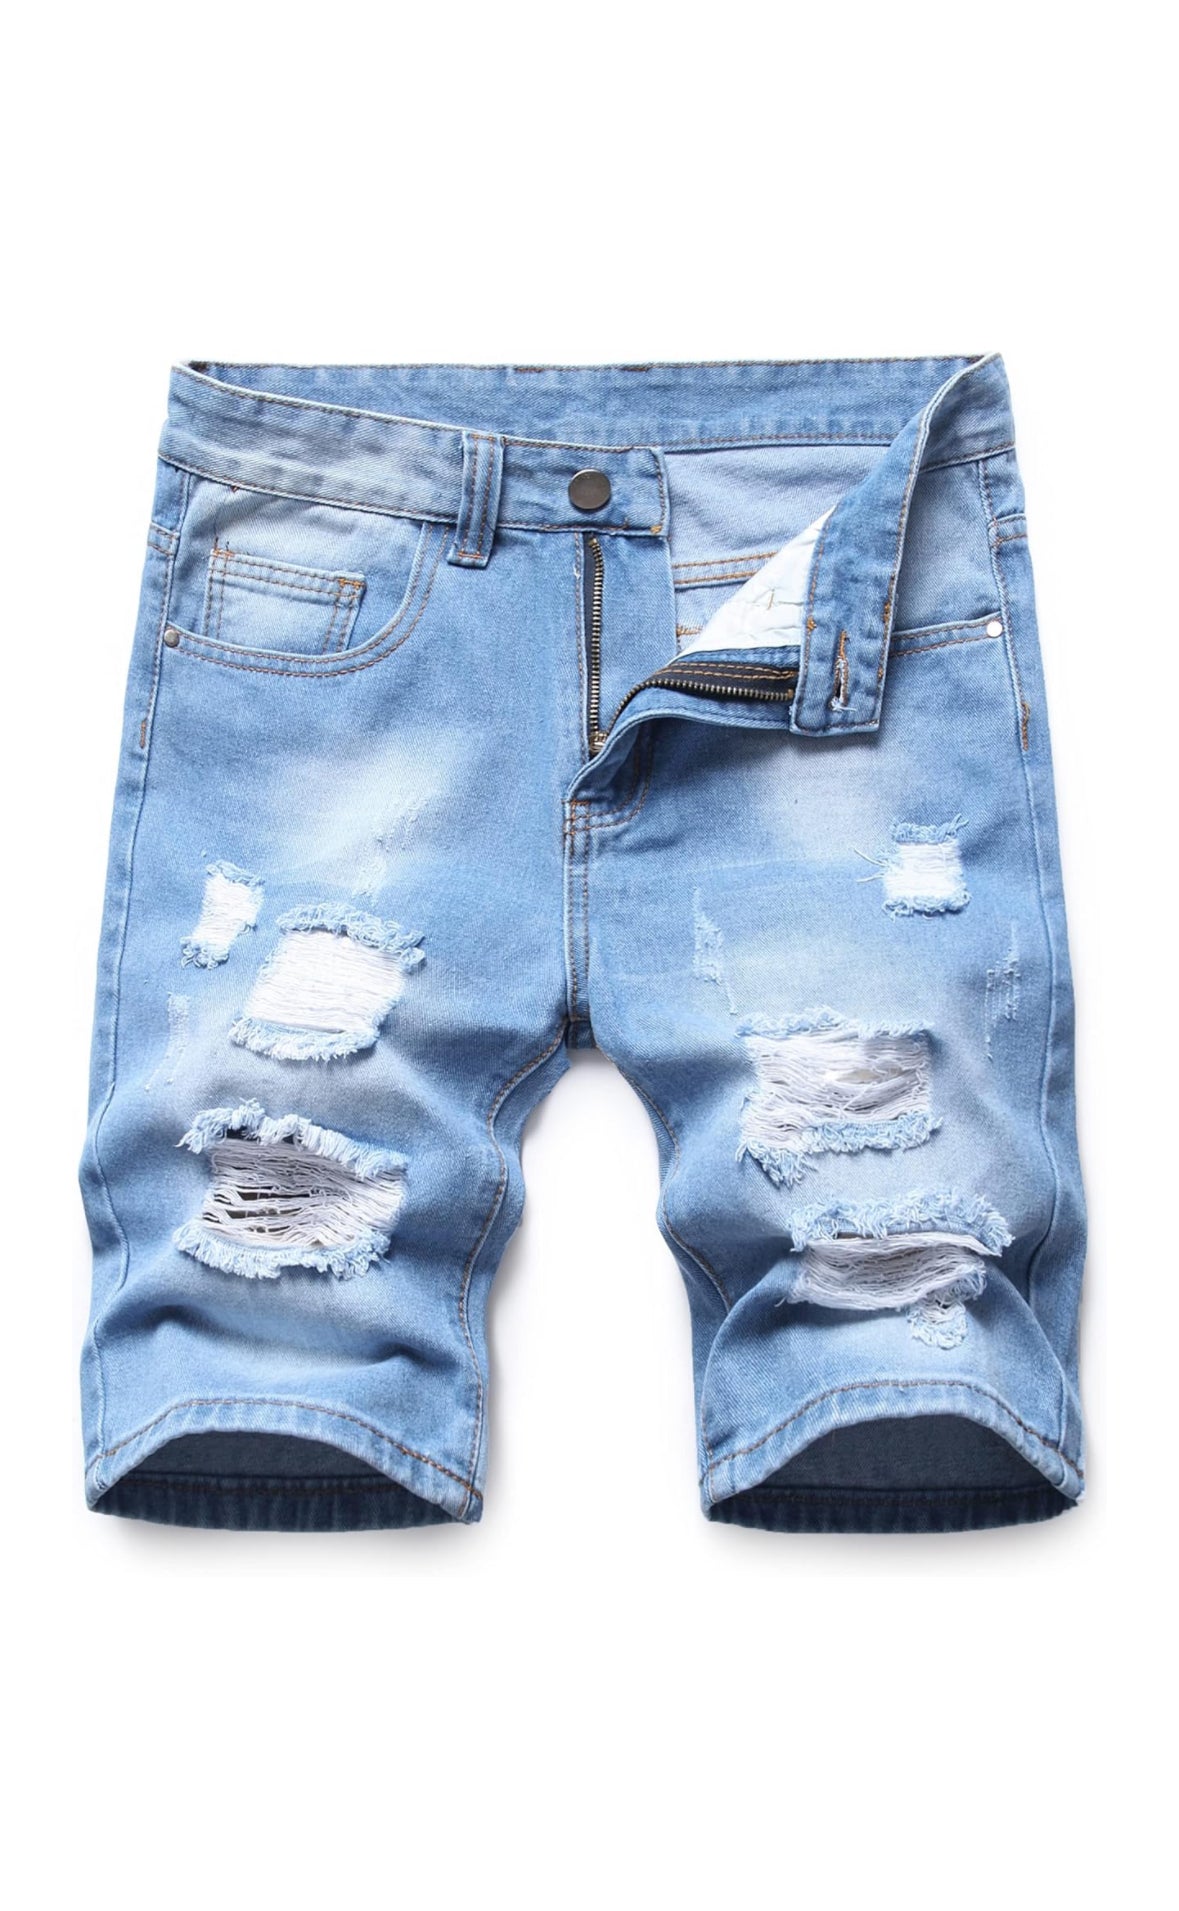 Men’s jean shorts by the 2fifty2 brand